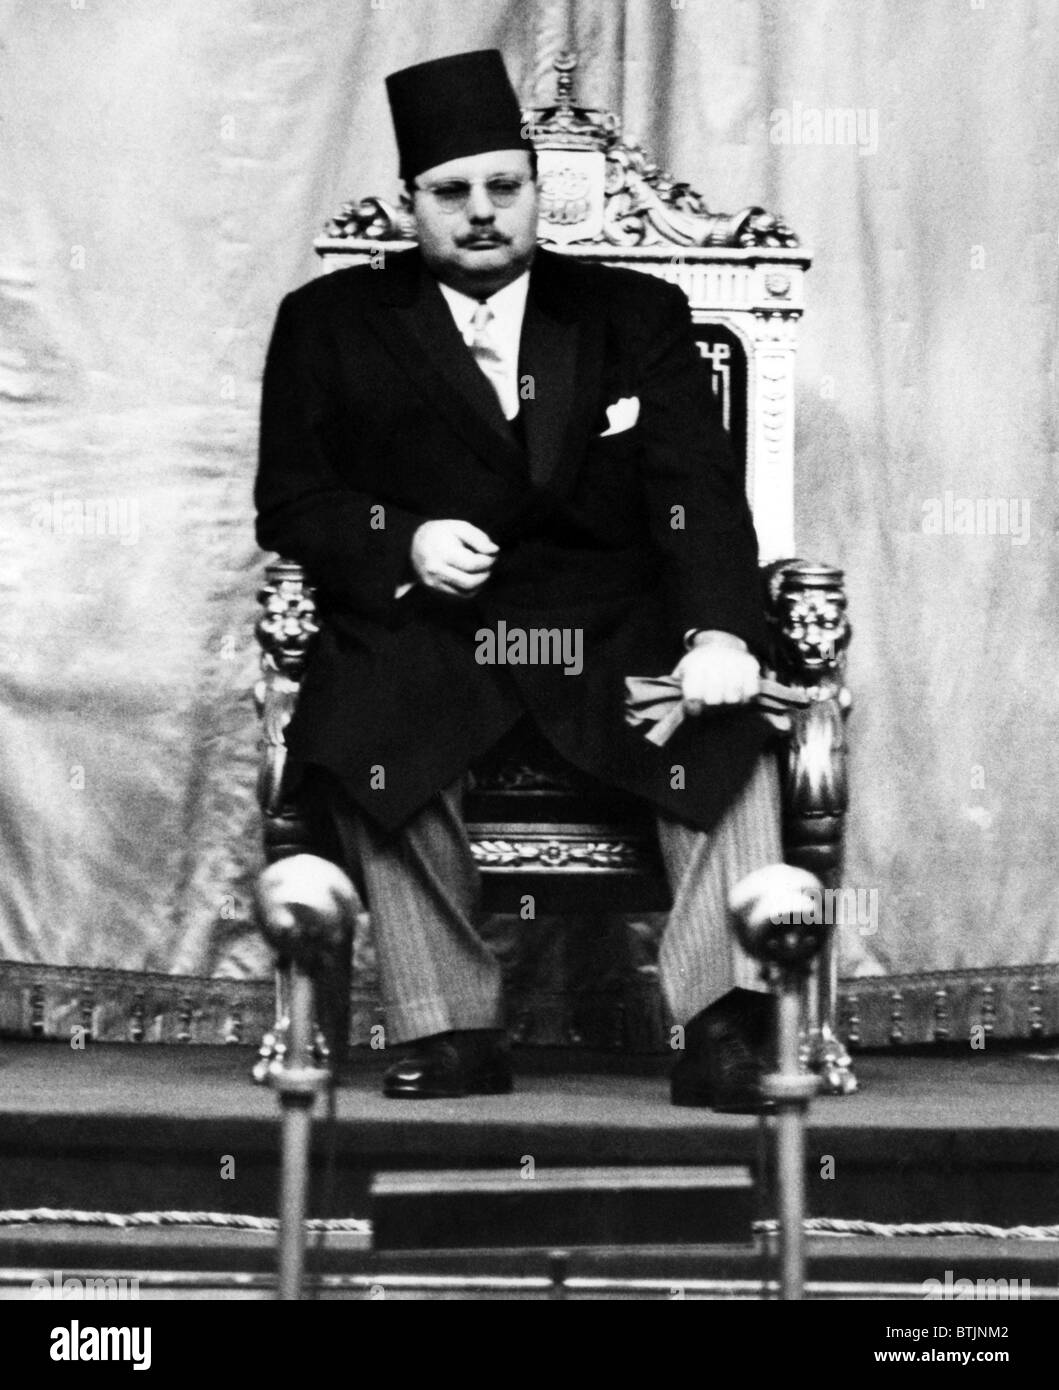 King Farouk of Egypt (1920-1965), listens from his throne as the newly appointed Prime Minister, Mustafa Nahas Pasha delivers a Stock Photo